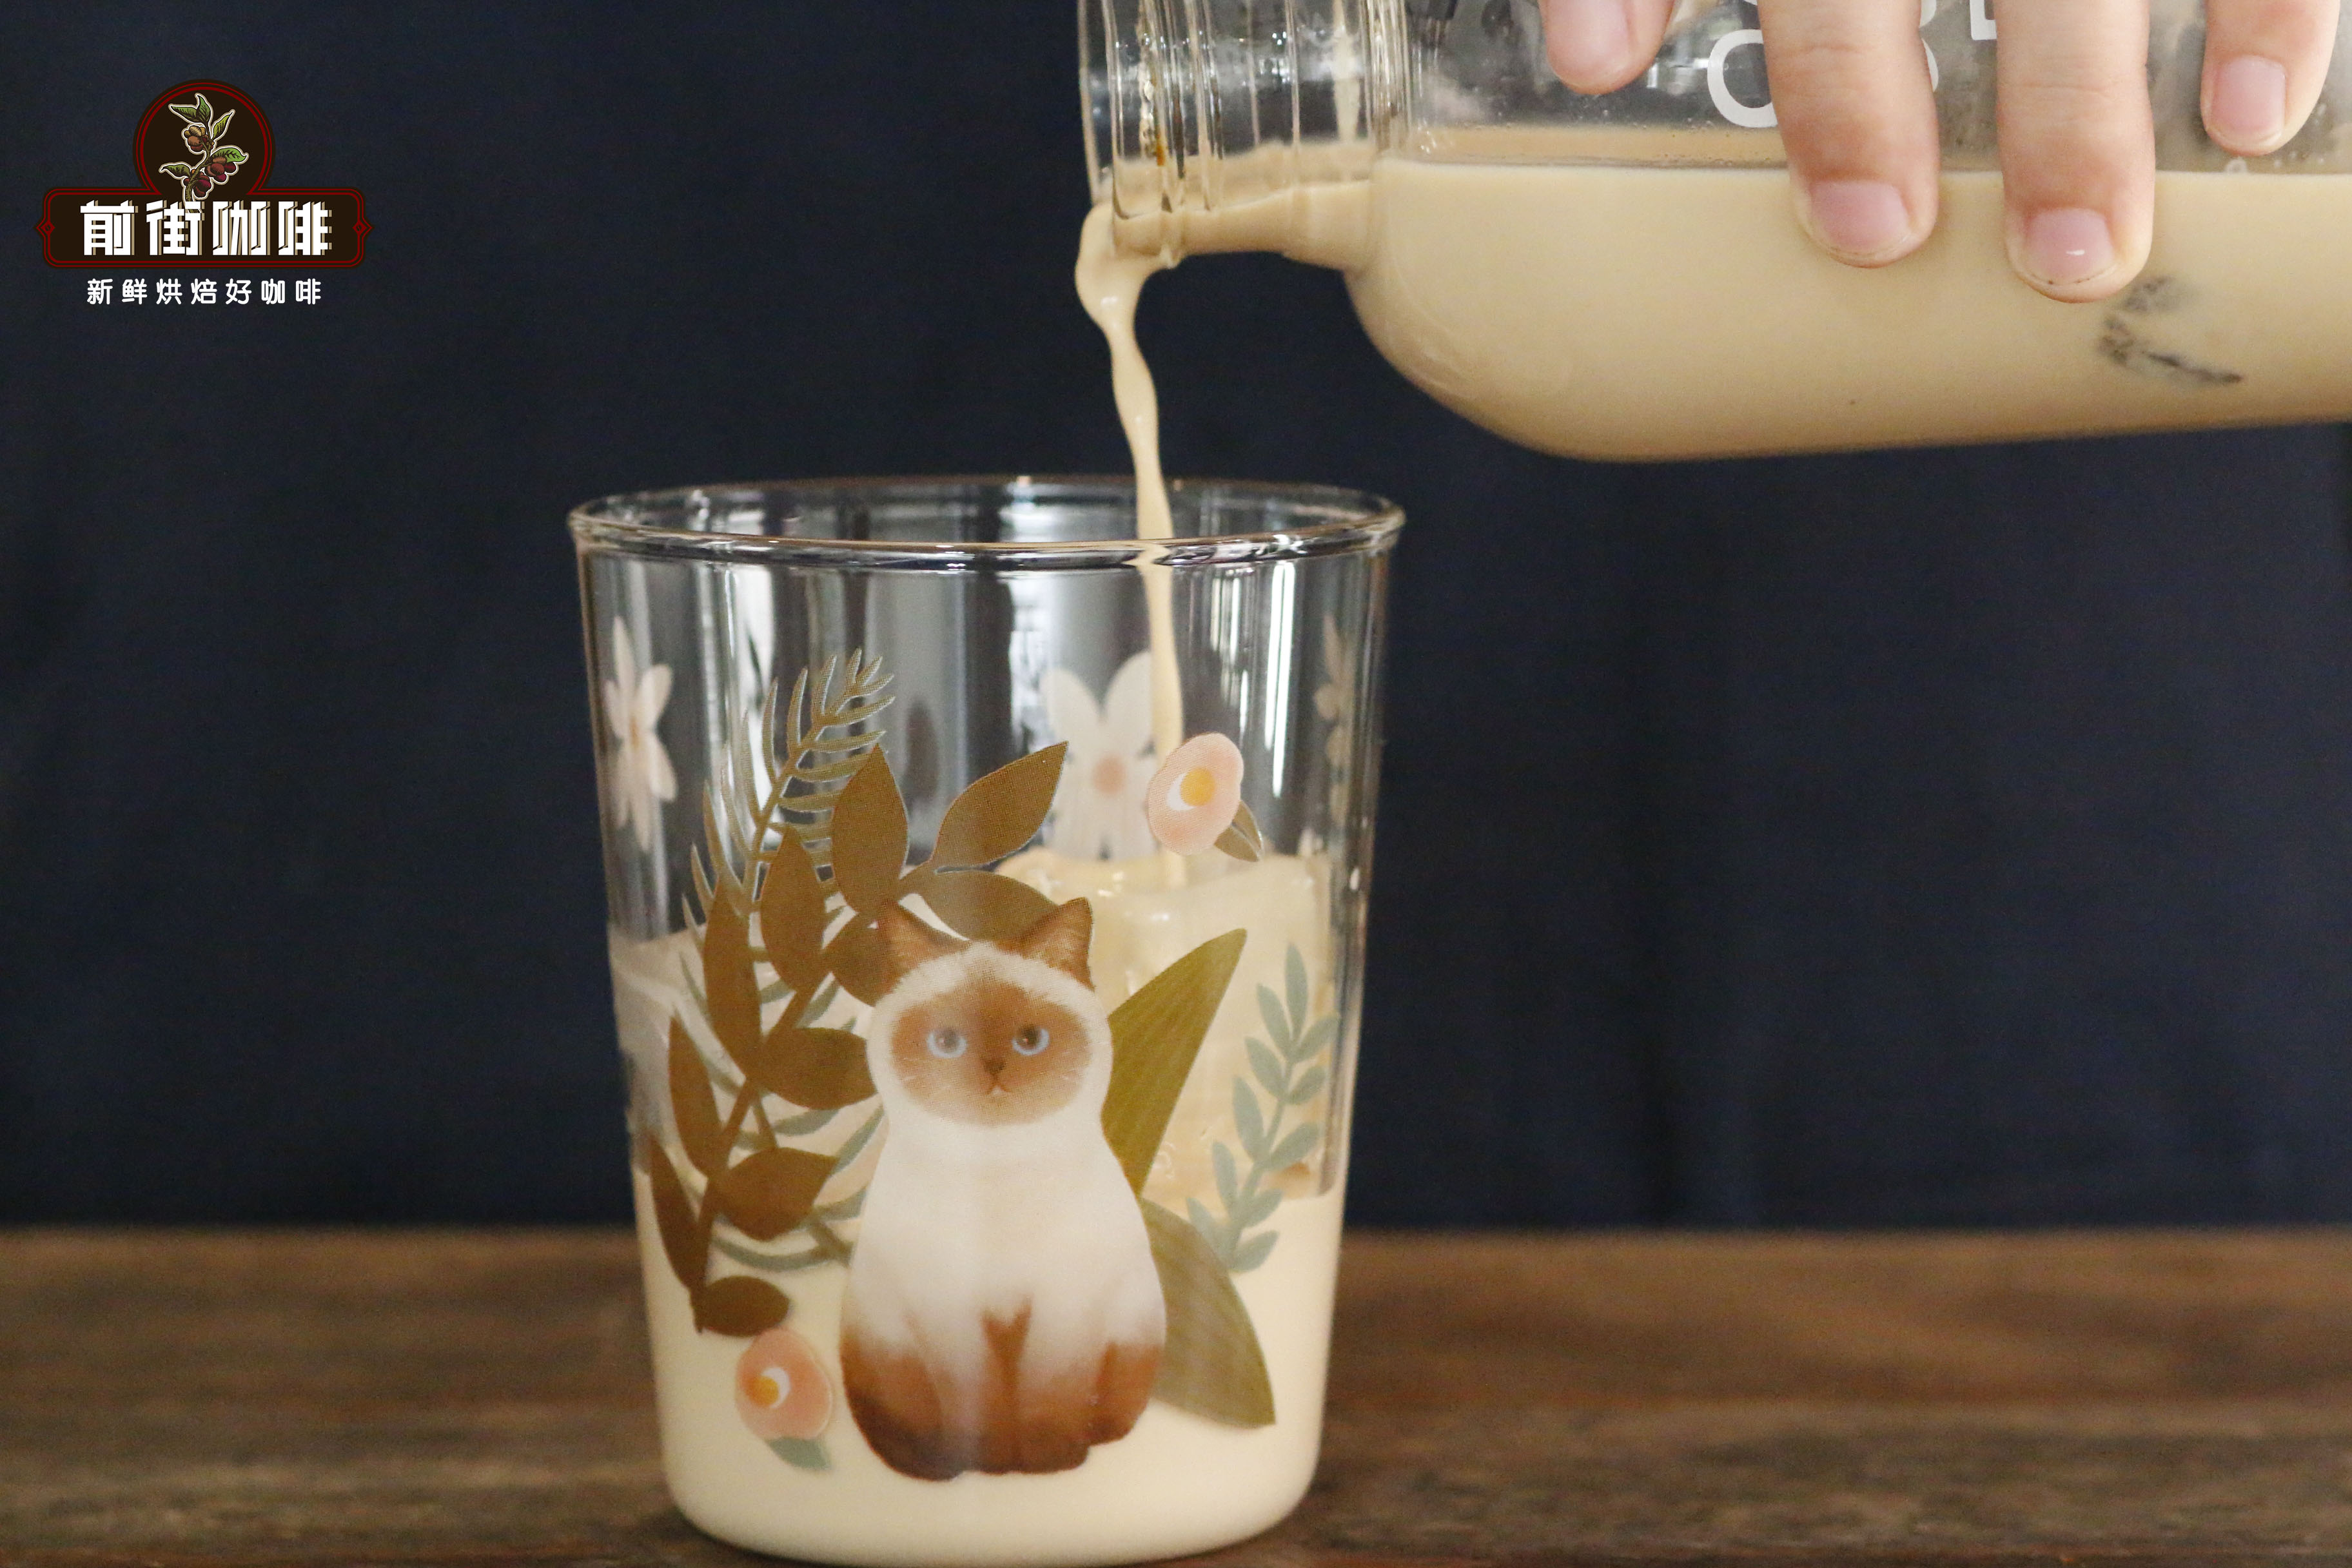 How do you make lattes at home without a coffee maker? How to make cold latte milk coffee